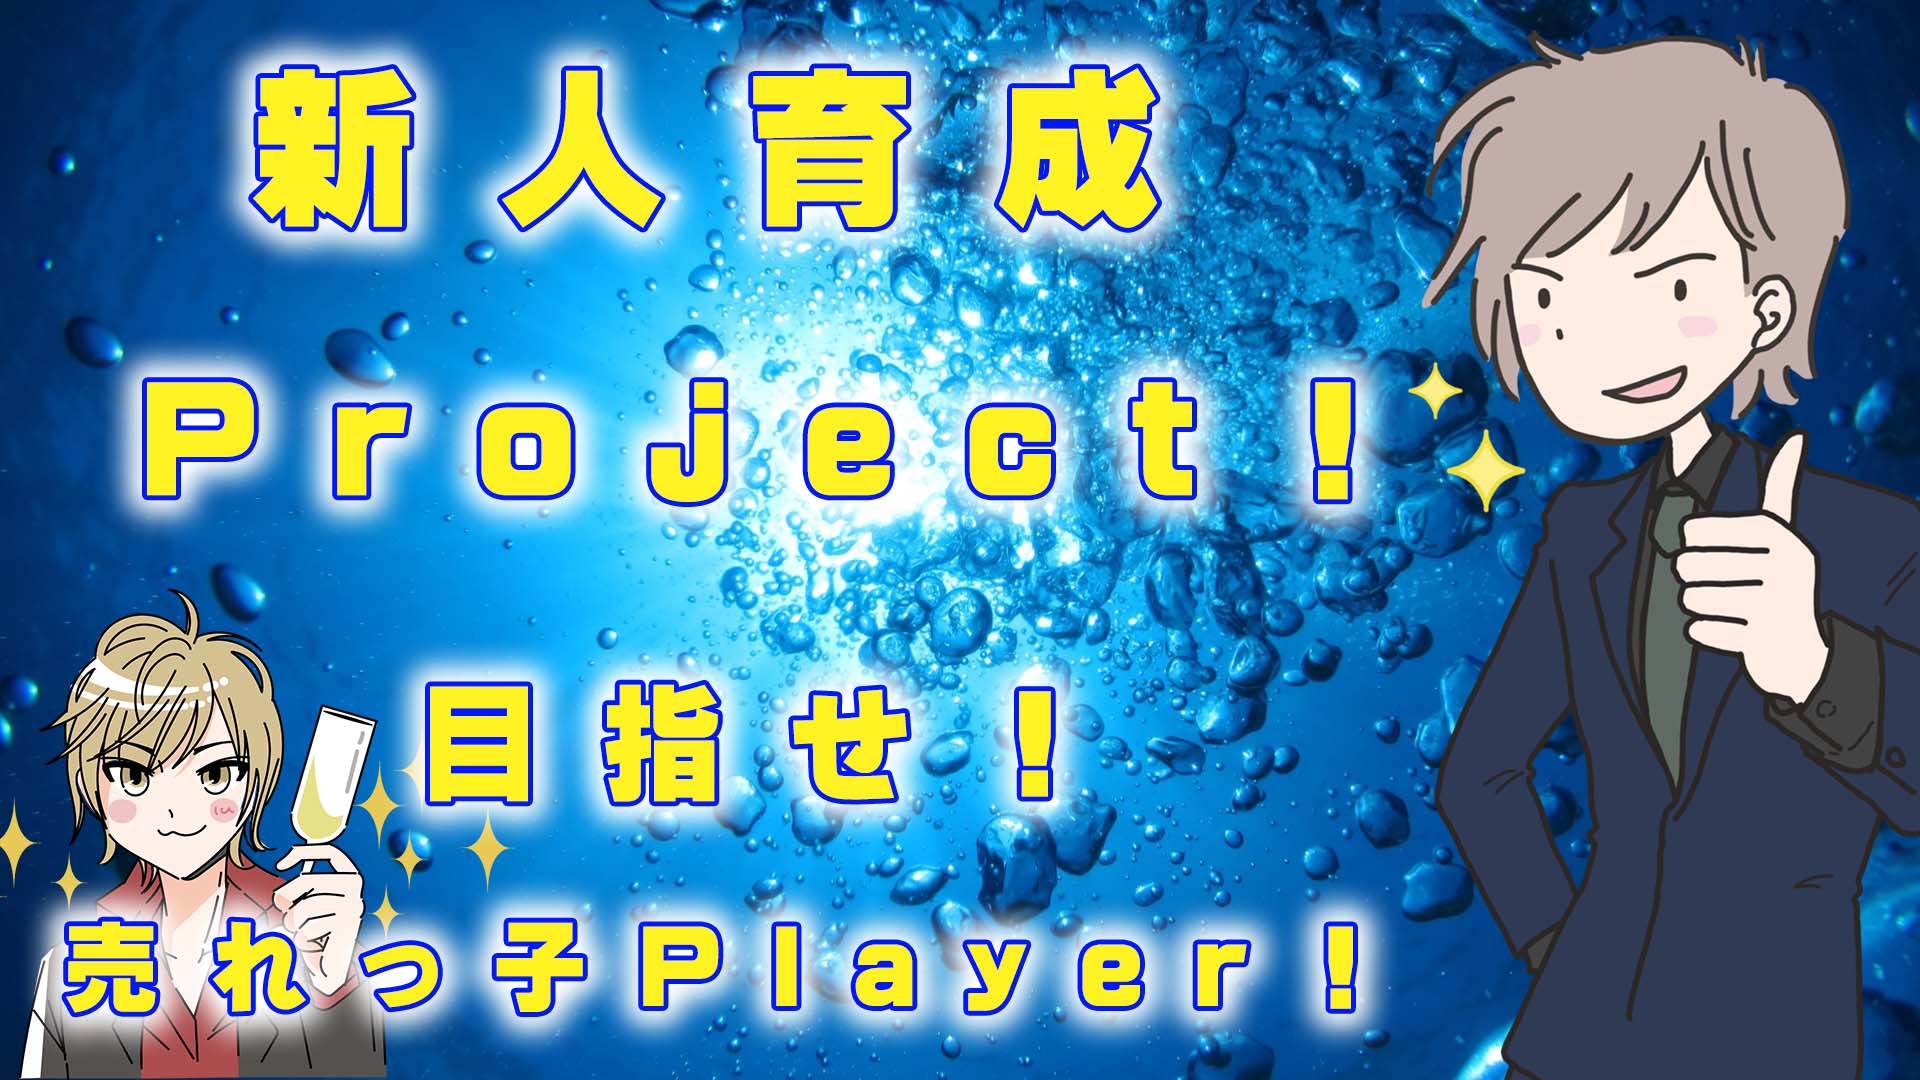 MERRY GO ROUND 育成Project！！目指せ！売れっ子Player！！